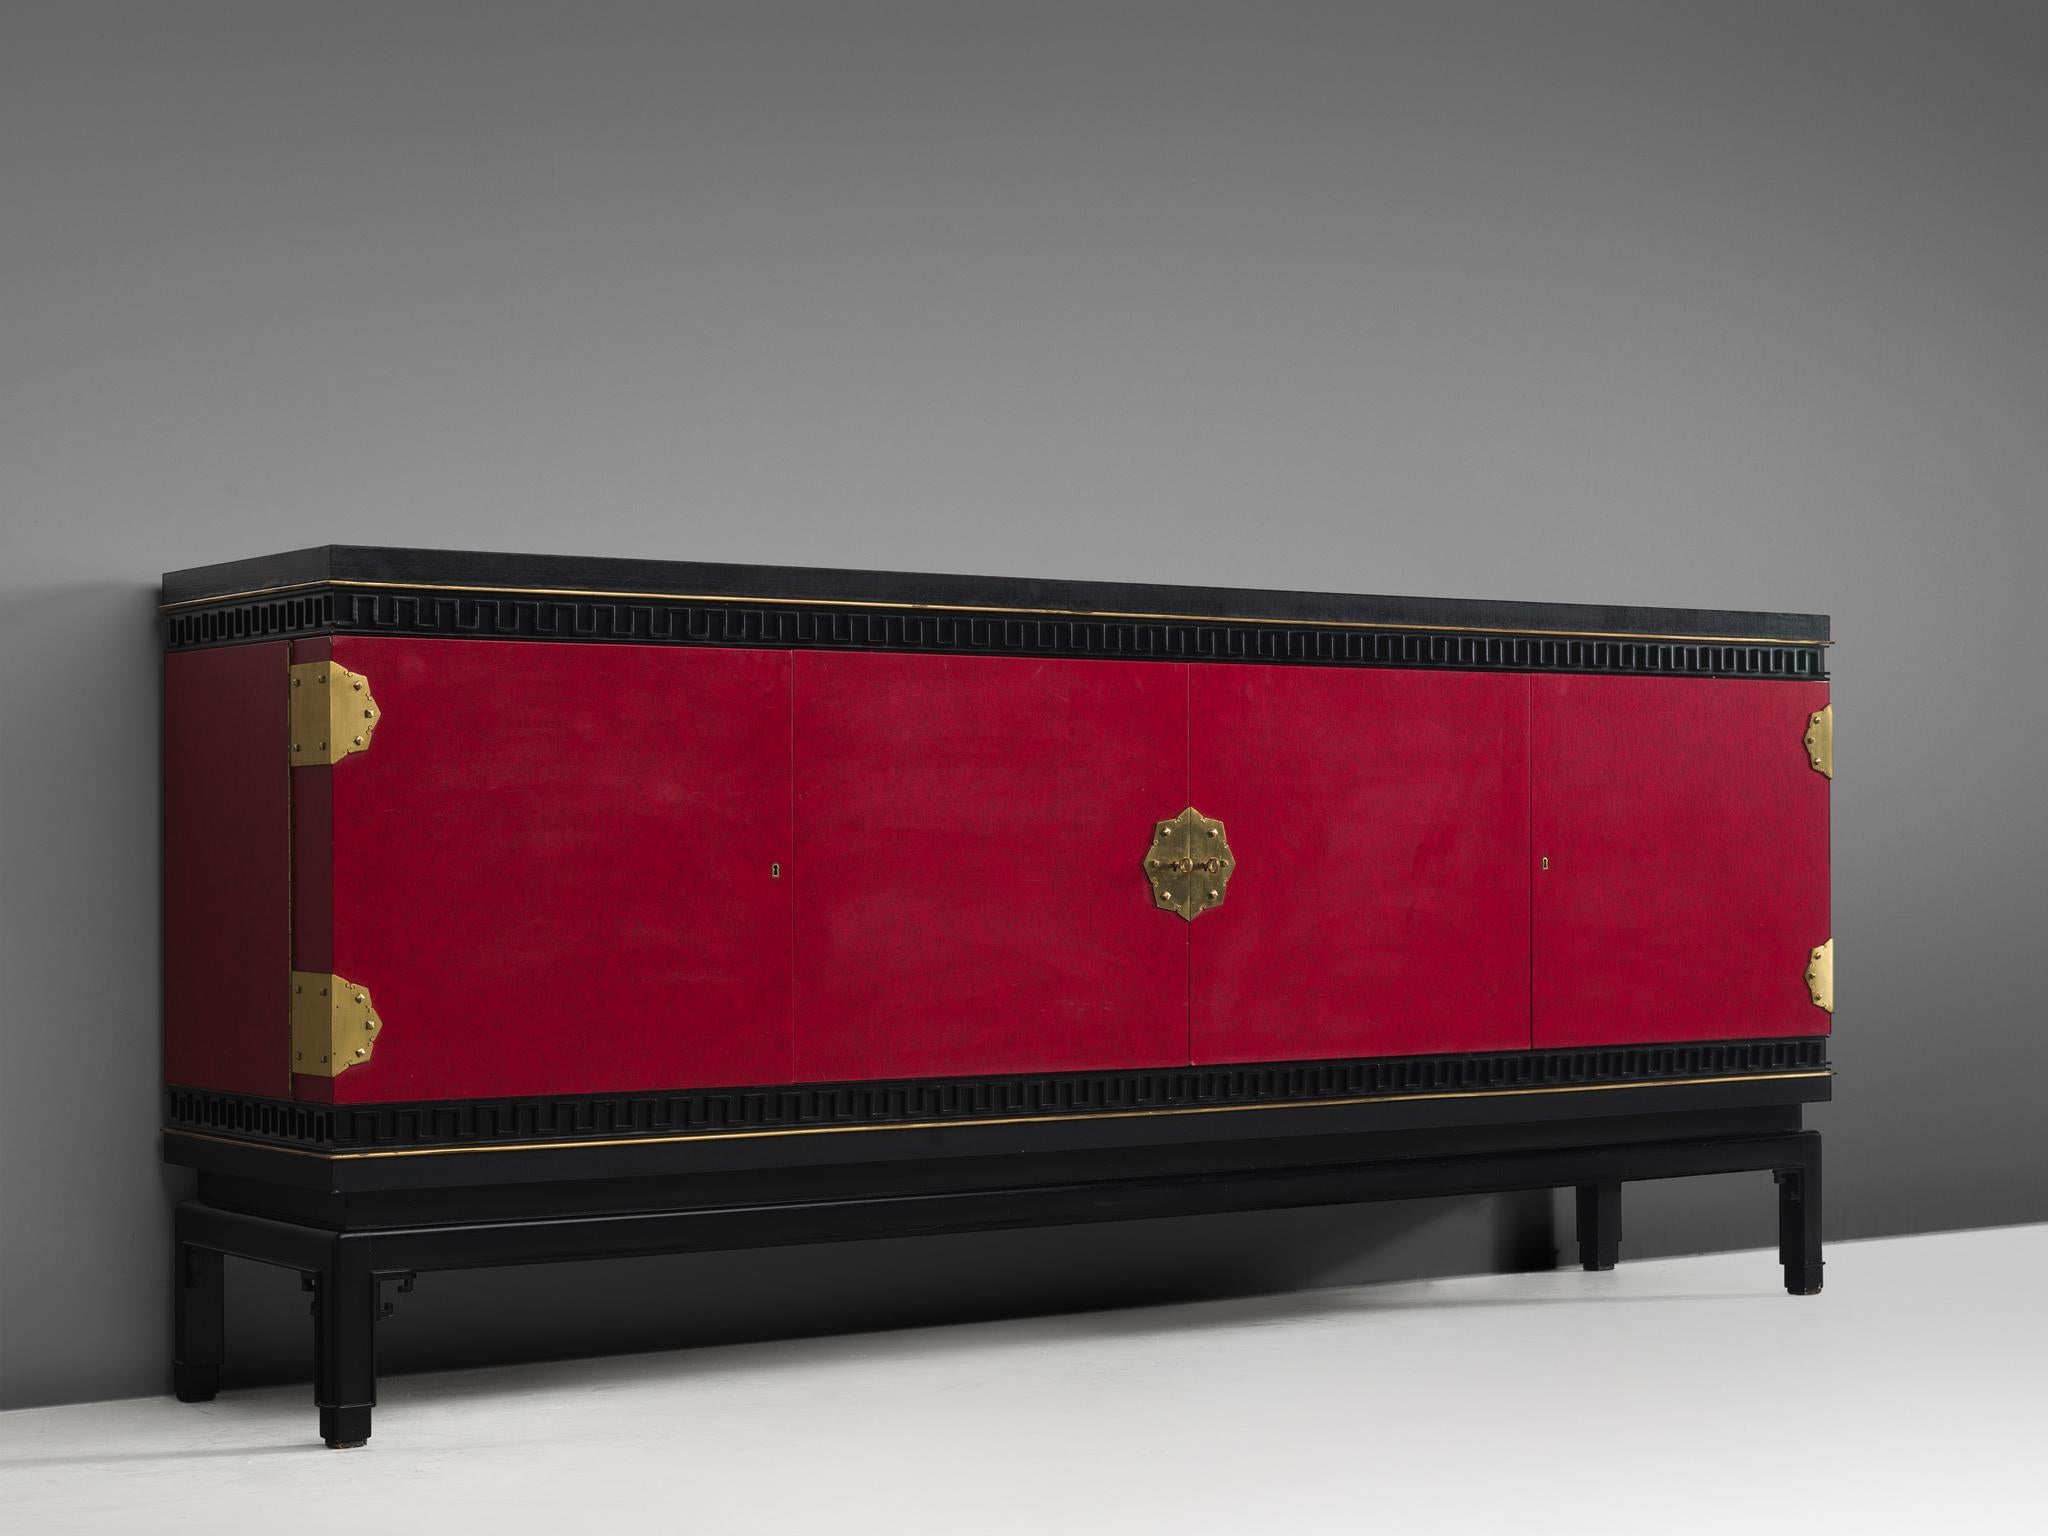 Sideboard, in oak, brass and skai, by De Coene, Belgium, 1960s. 

Rare early Art Deco style sideboard in oak and skai, signed by Belgian De Coene Frères. This credenza shows a beautiful deep red color with brass details. The detailing has hints of